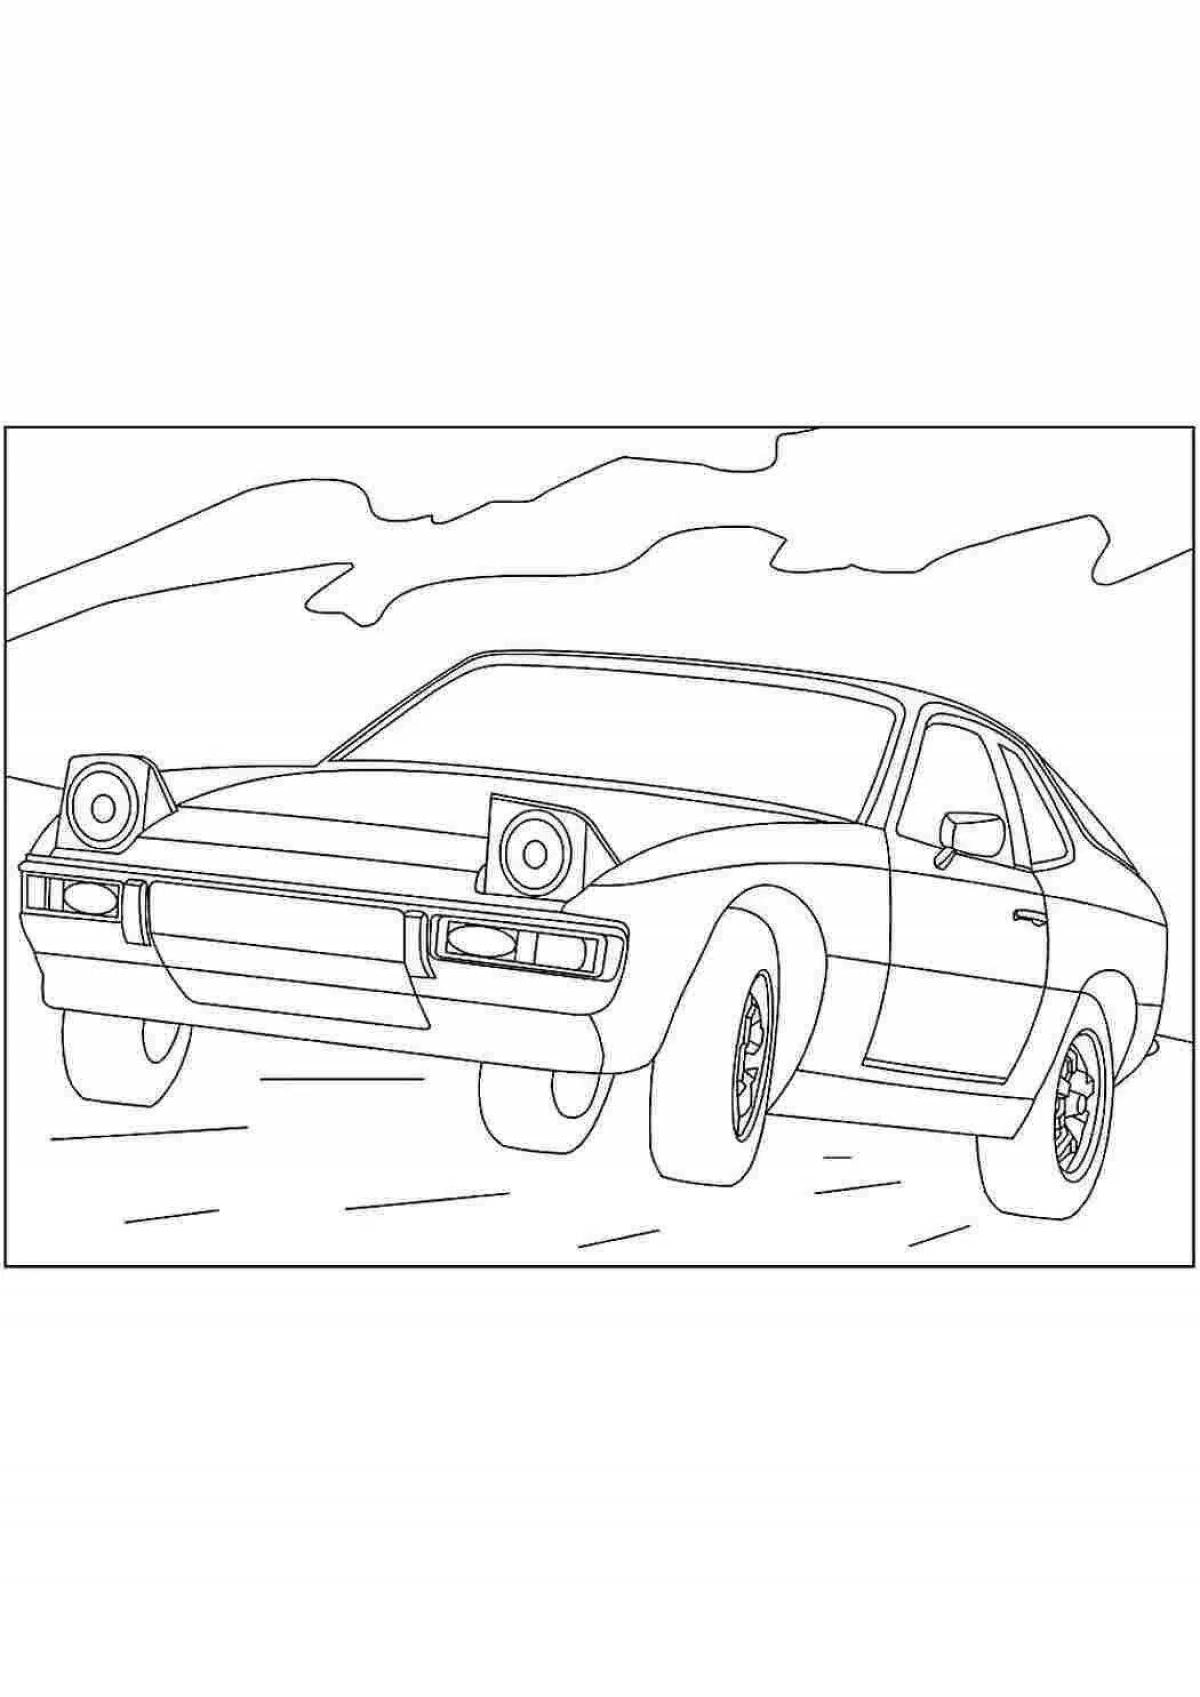 Colorful turbo car coloring page